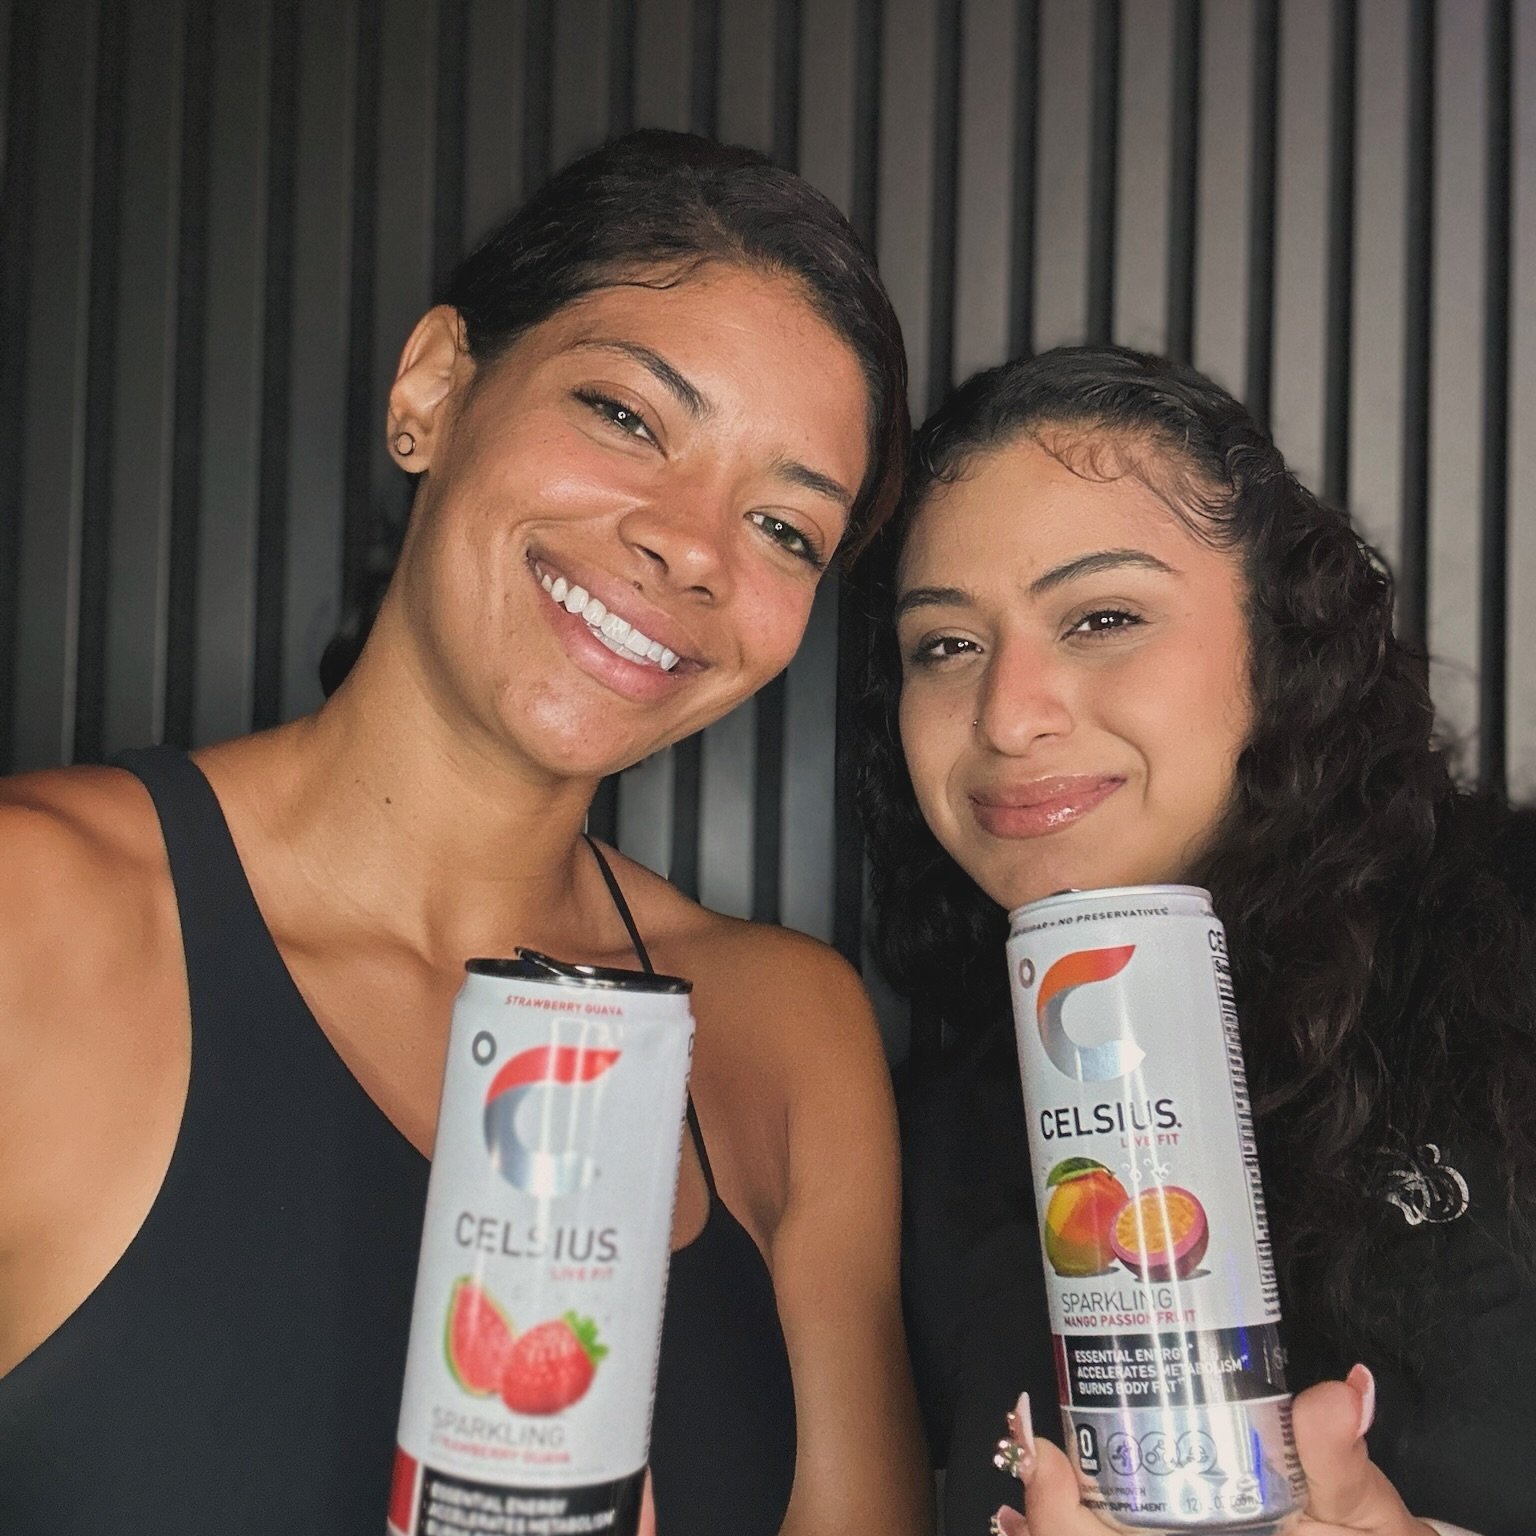 Our Celsius fridge is RESTOCKED! You may even see some new flavors! Grab yours during your next visit to the studio!

📍rhythm &amp; release via @thecitadelmia 
🖱️rhythmandrelease.com

#rhythmandrelease #spinclass #celsius #gymsinmiami